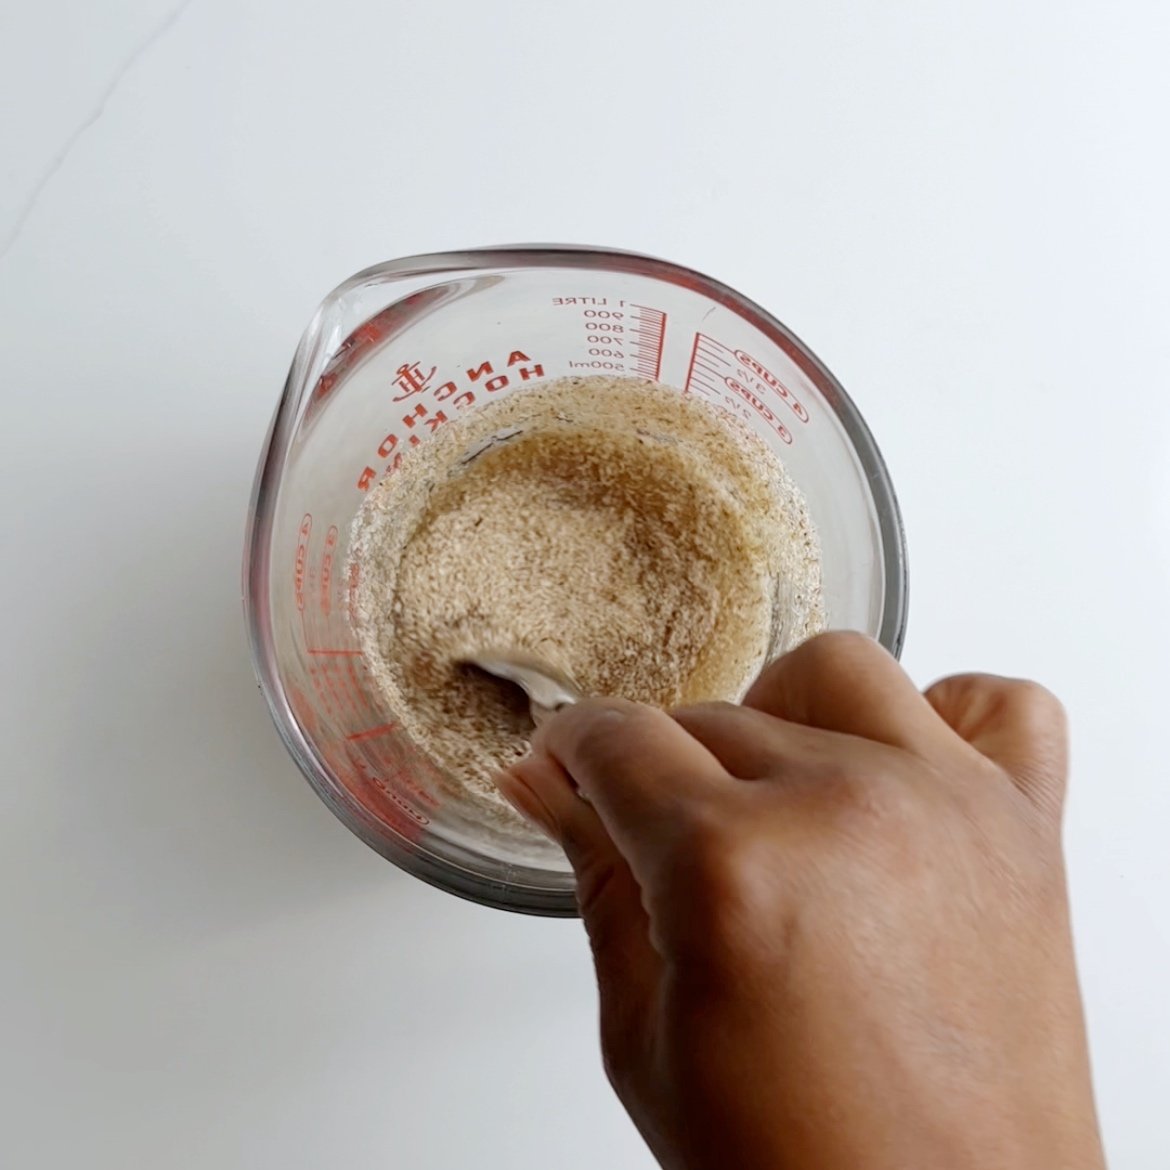 Mixing psyllium husk and water in a glass measuring cup